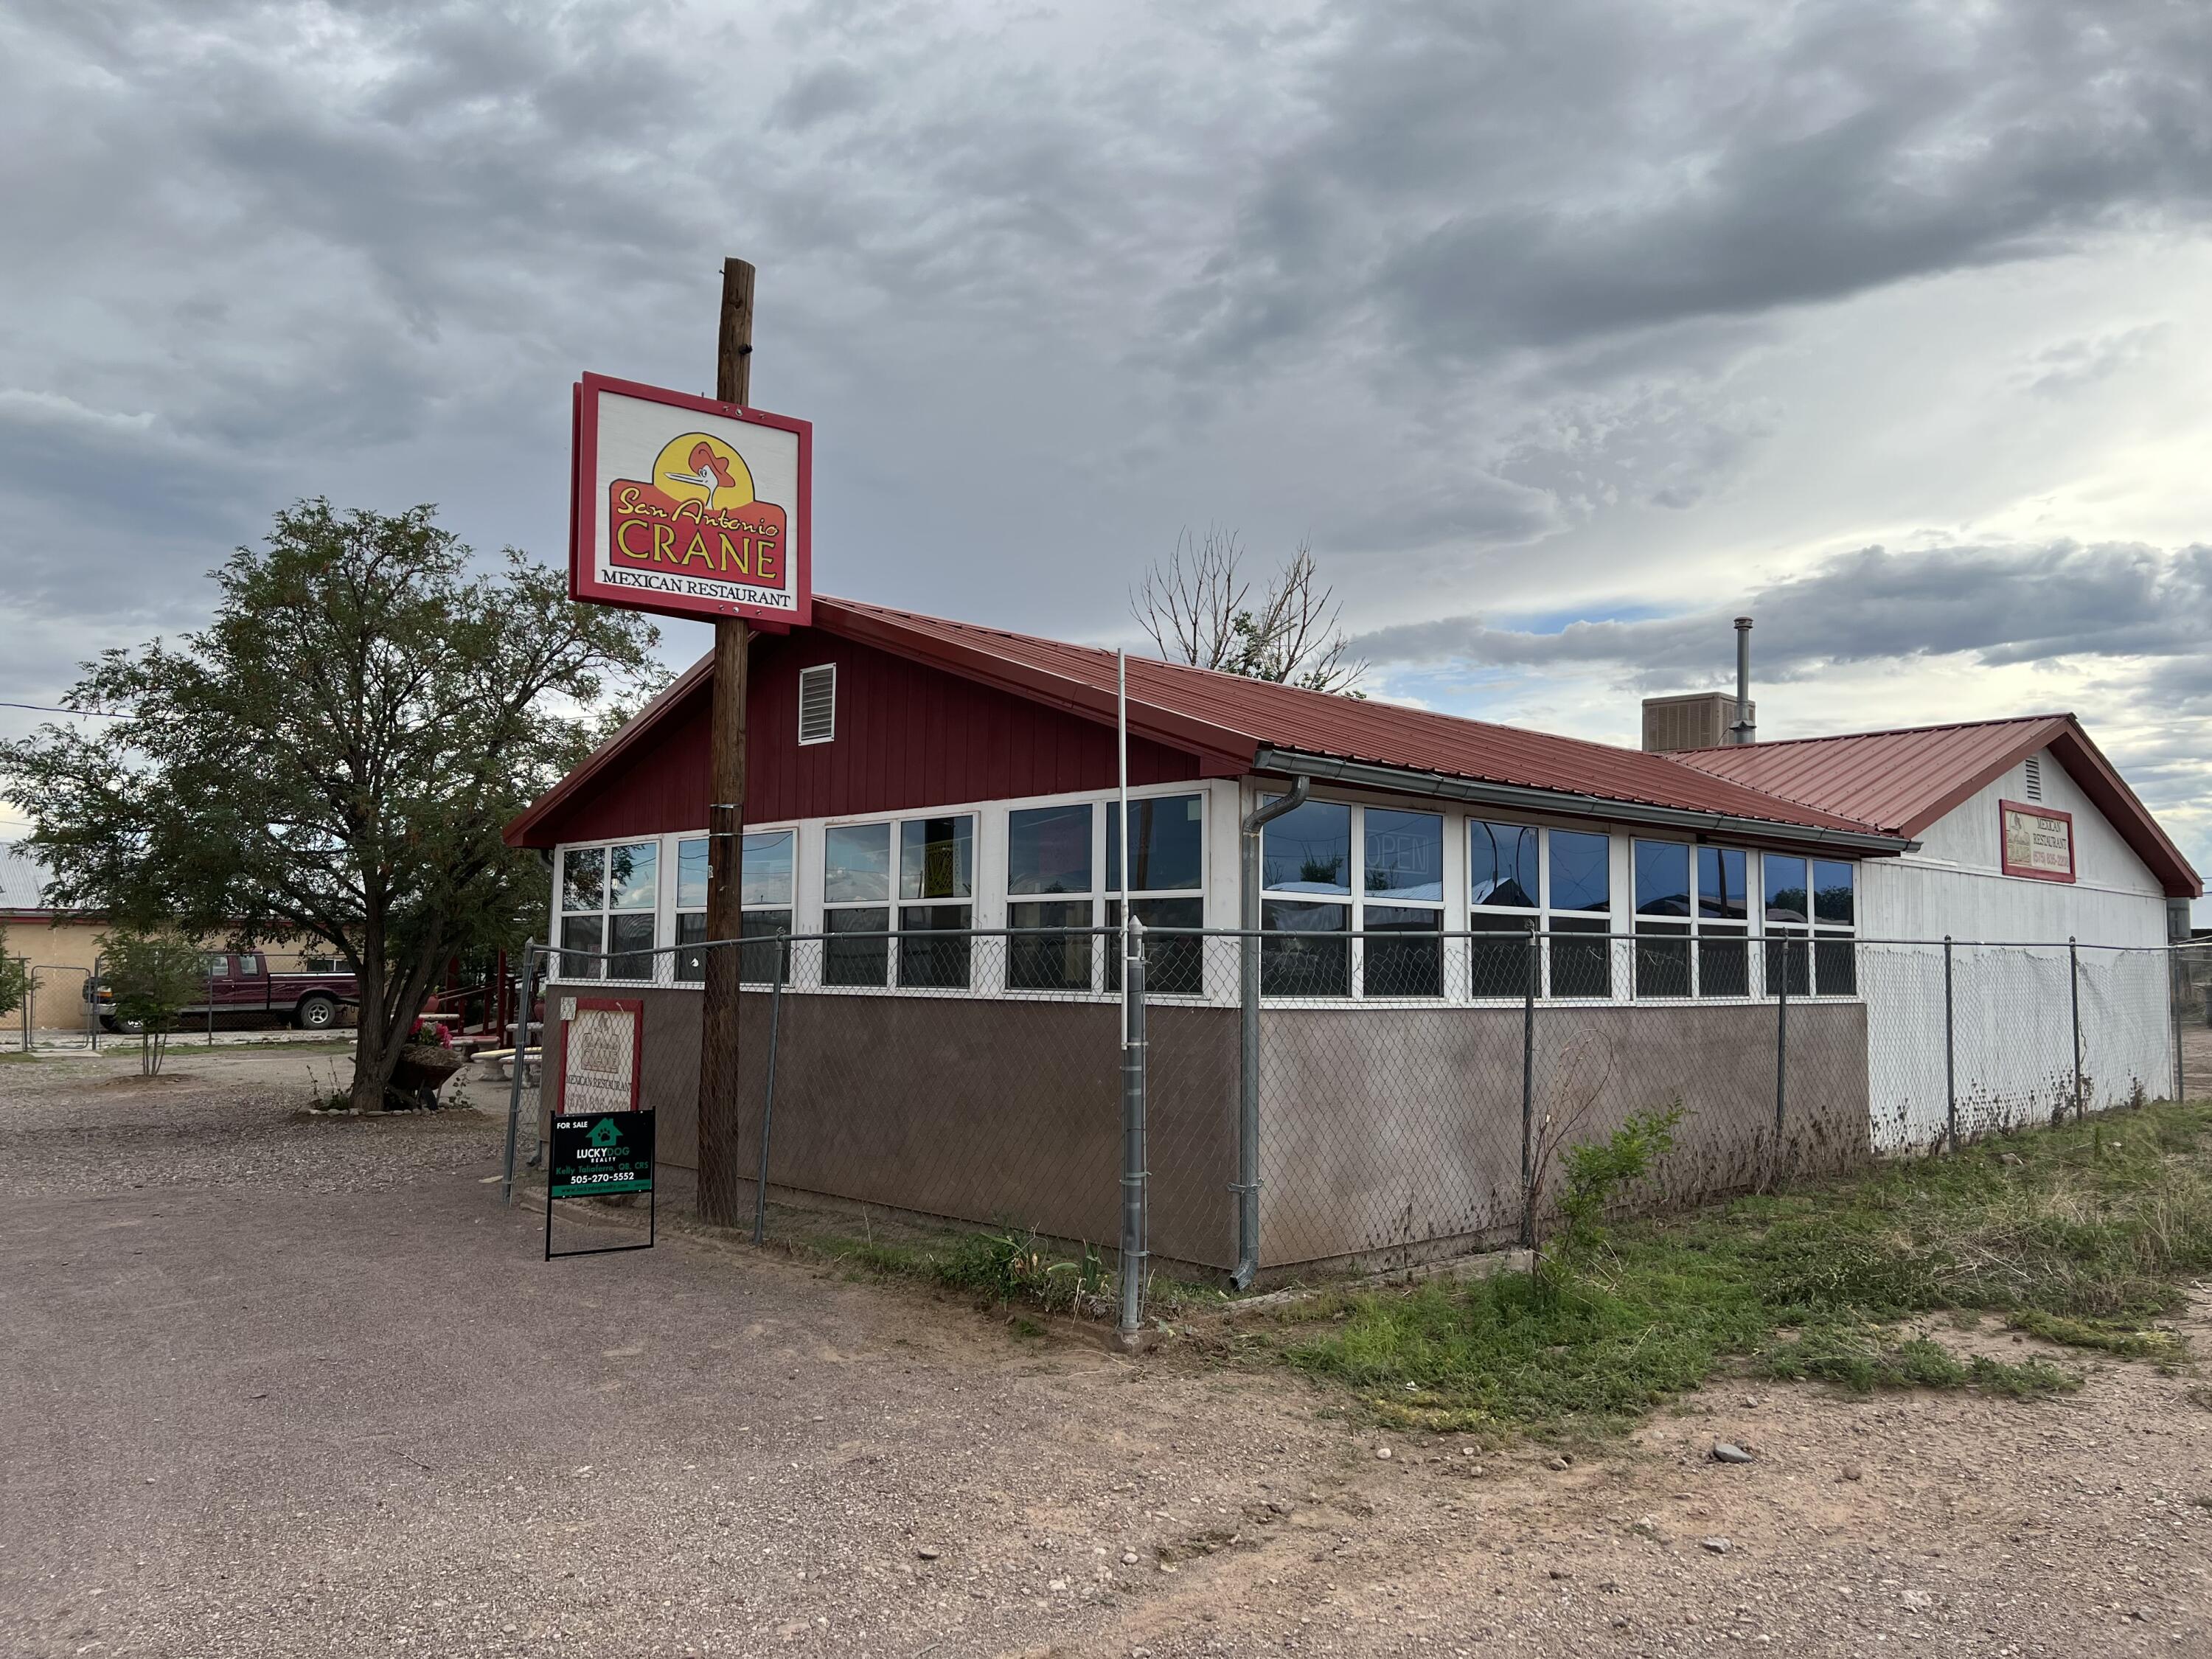 17 South Pino Street, San Antonio, New Mexico 87832, ,Commercial Sale,For Sale,17 South Pino Street,1020858